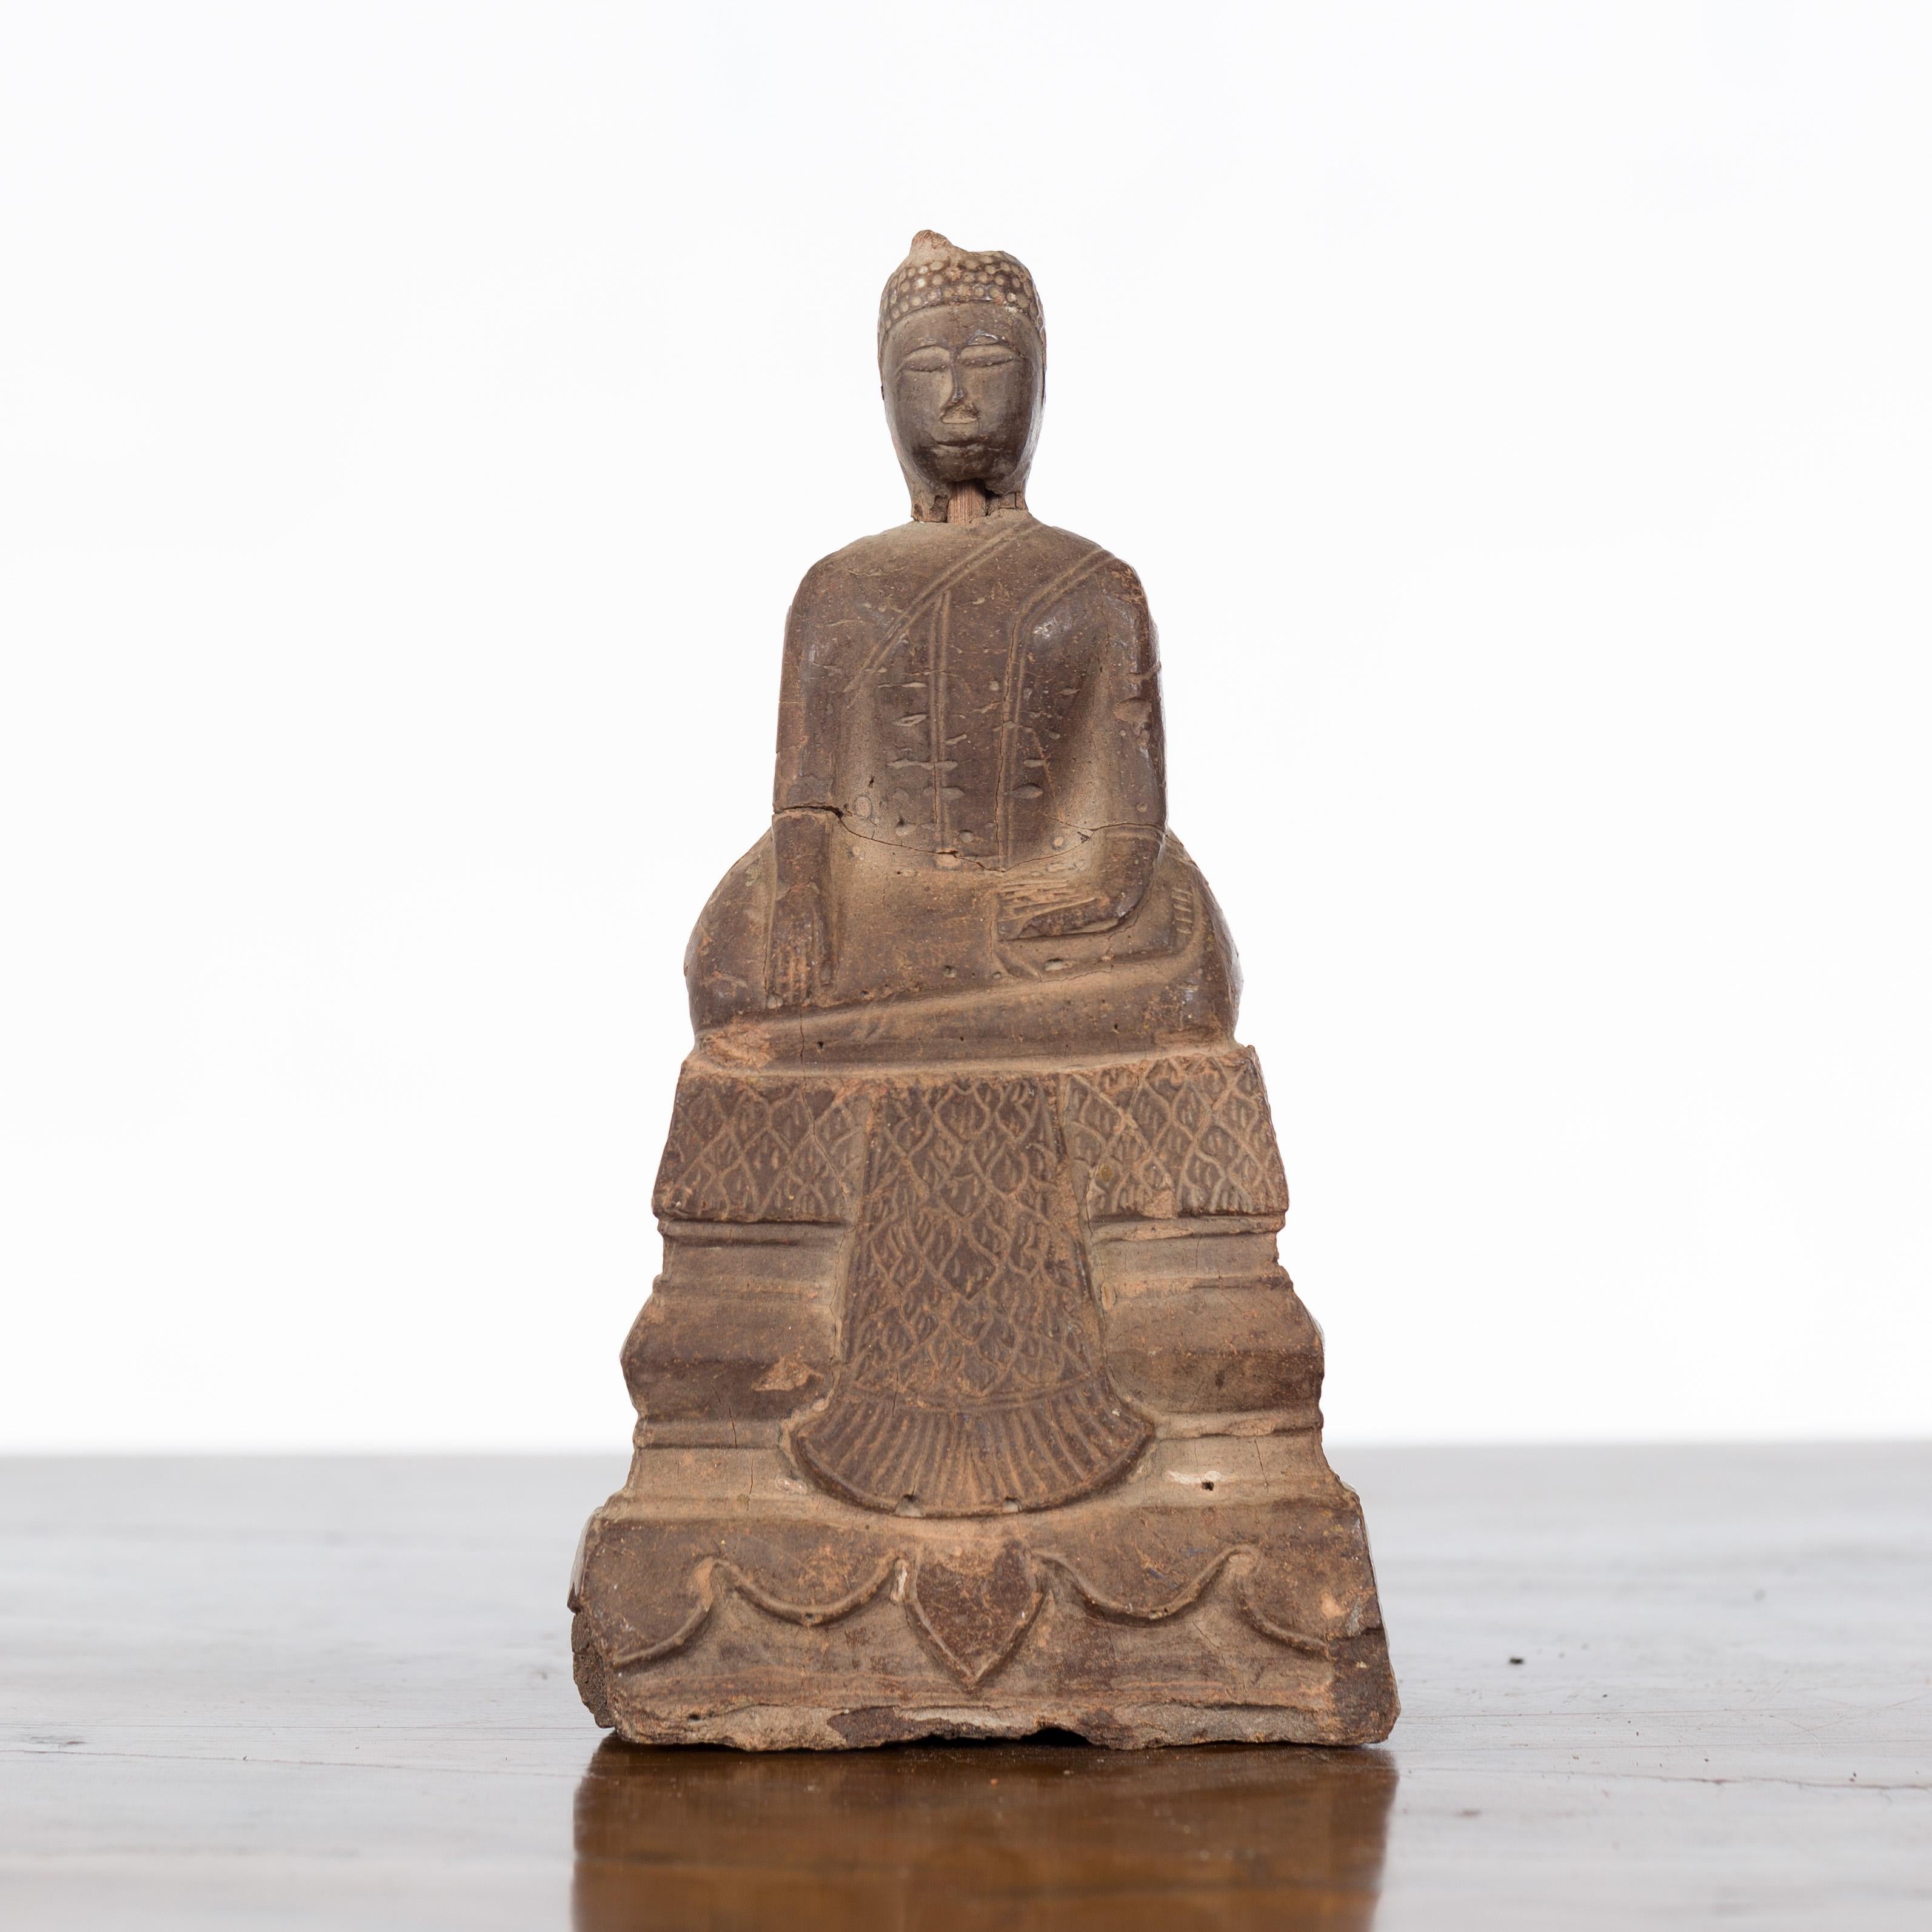 A petite antique Thai wooden Buddha sculpture from the Ayutthaya period, with the Bhumisparsha Mudra, Calling the Earth to Witness. Created in Thailand during the Ayutthaya period (1350–1767), this small sculpture depicts the Buddha seated in the